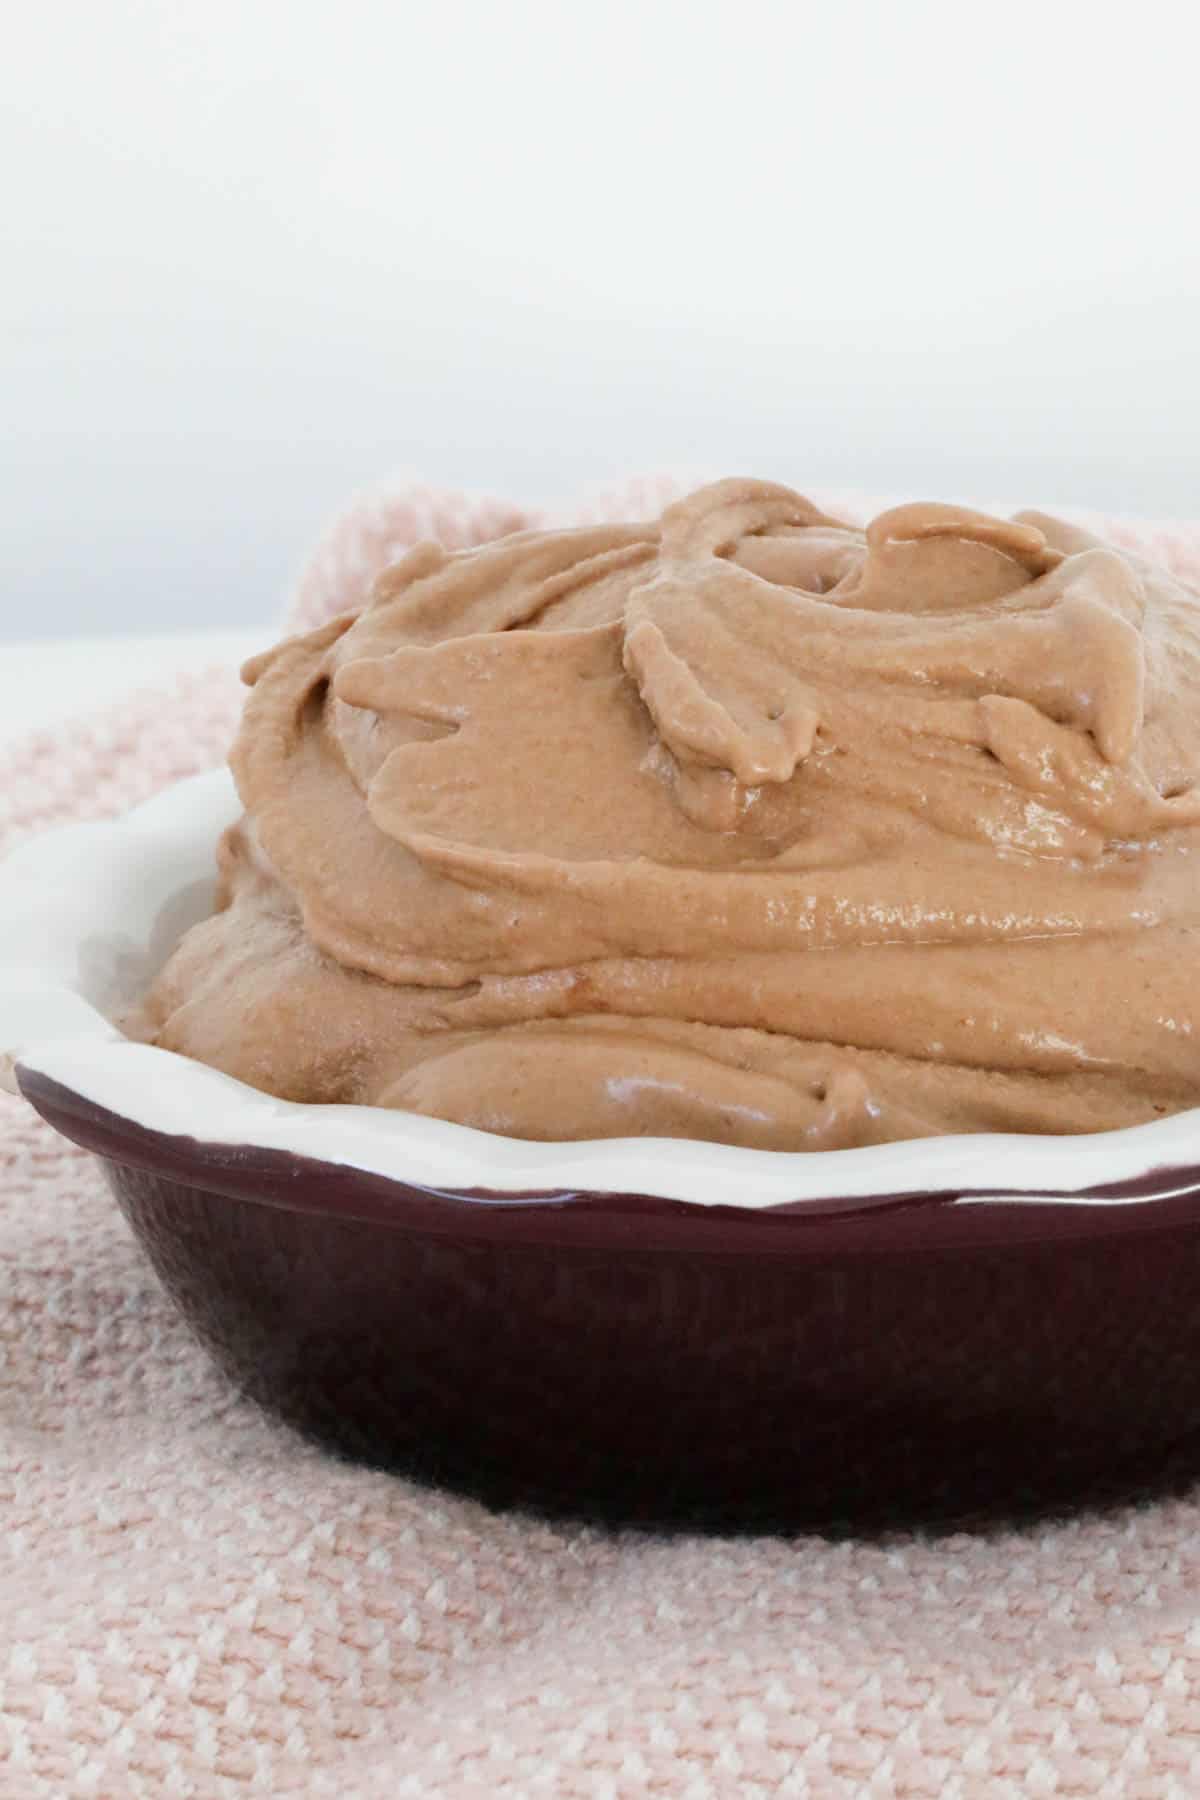 A bowl of homemade soft serve style ice cream.